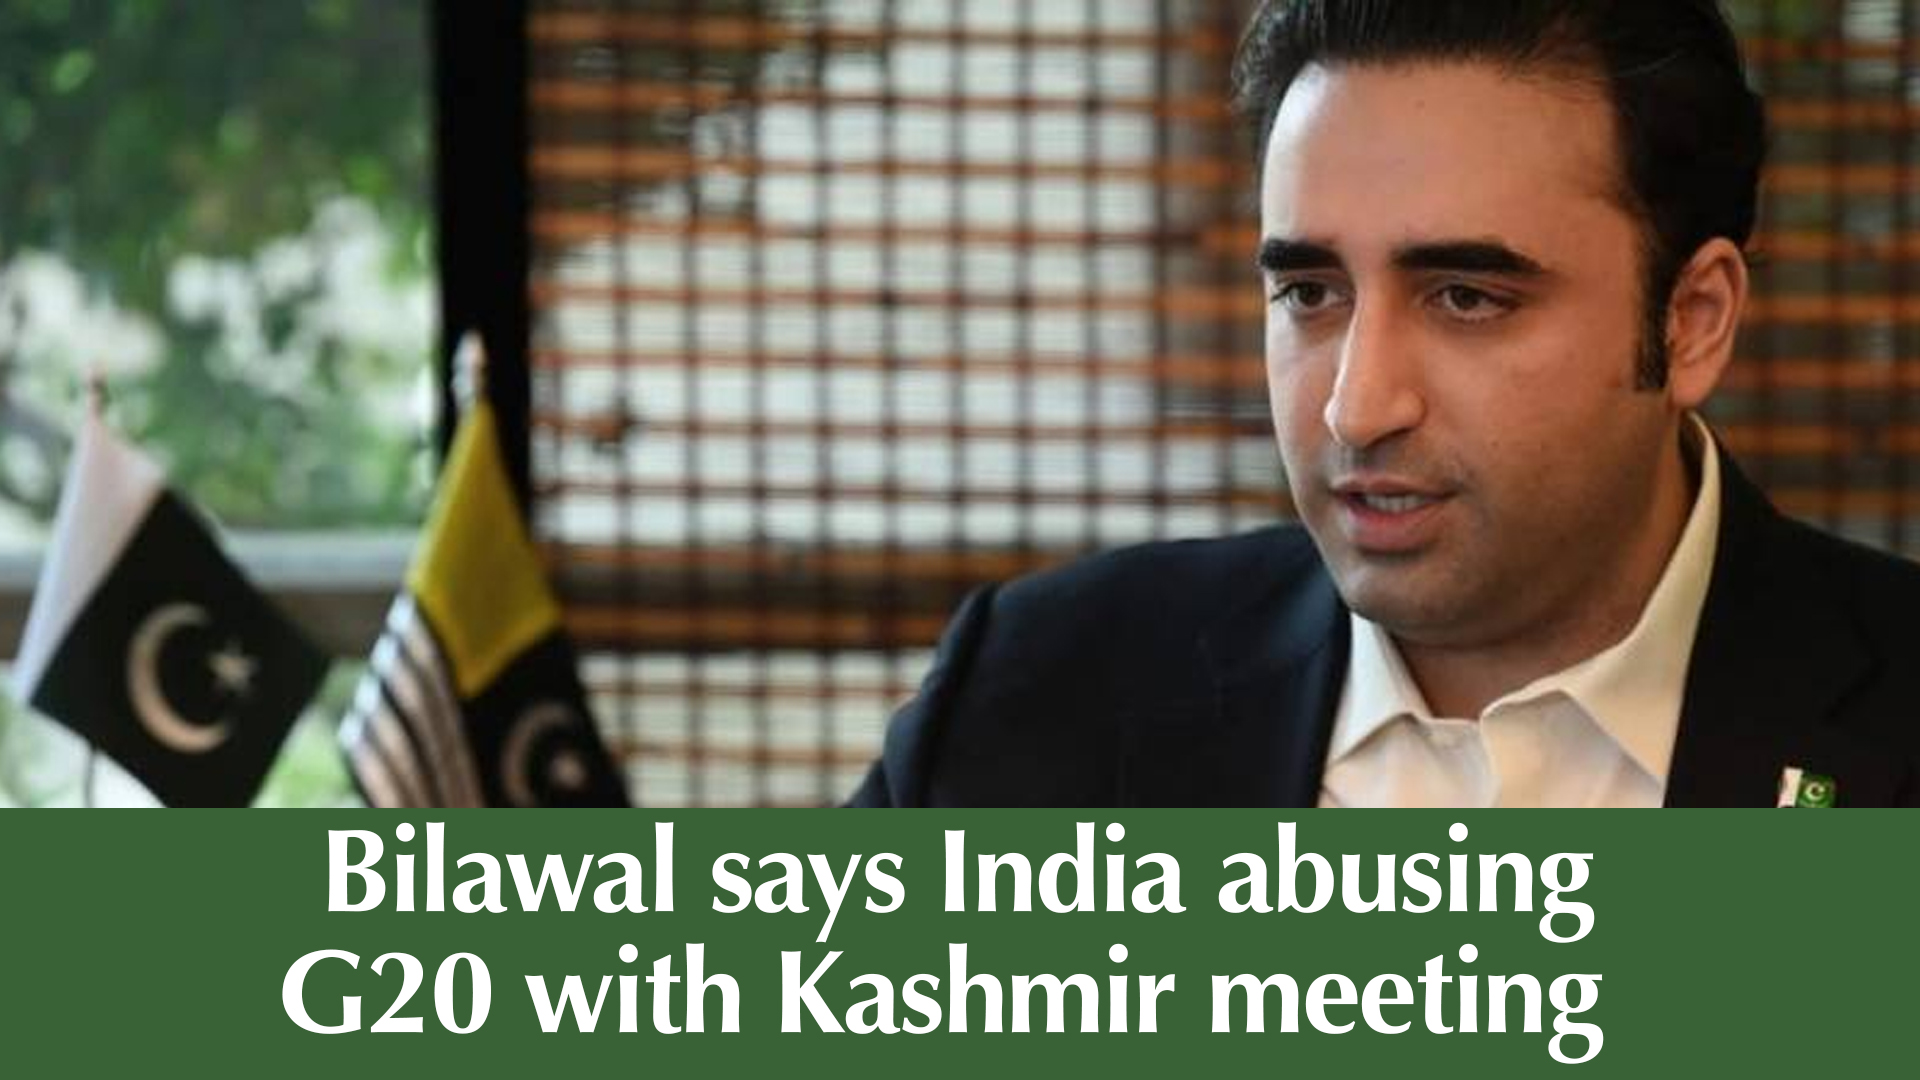 Bilawal says India abusing G20 with Kashmir meeting